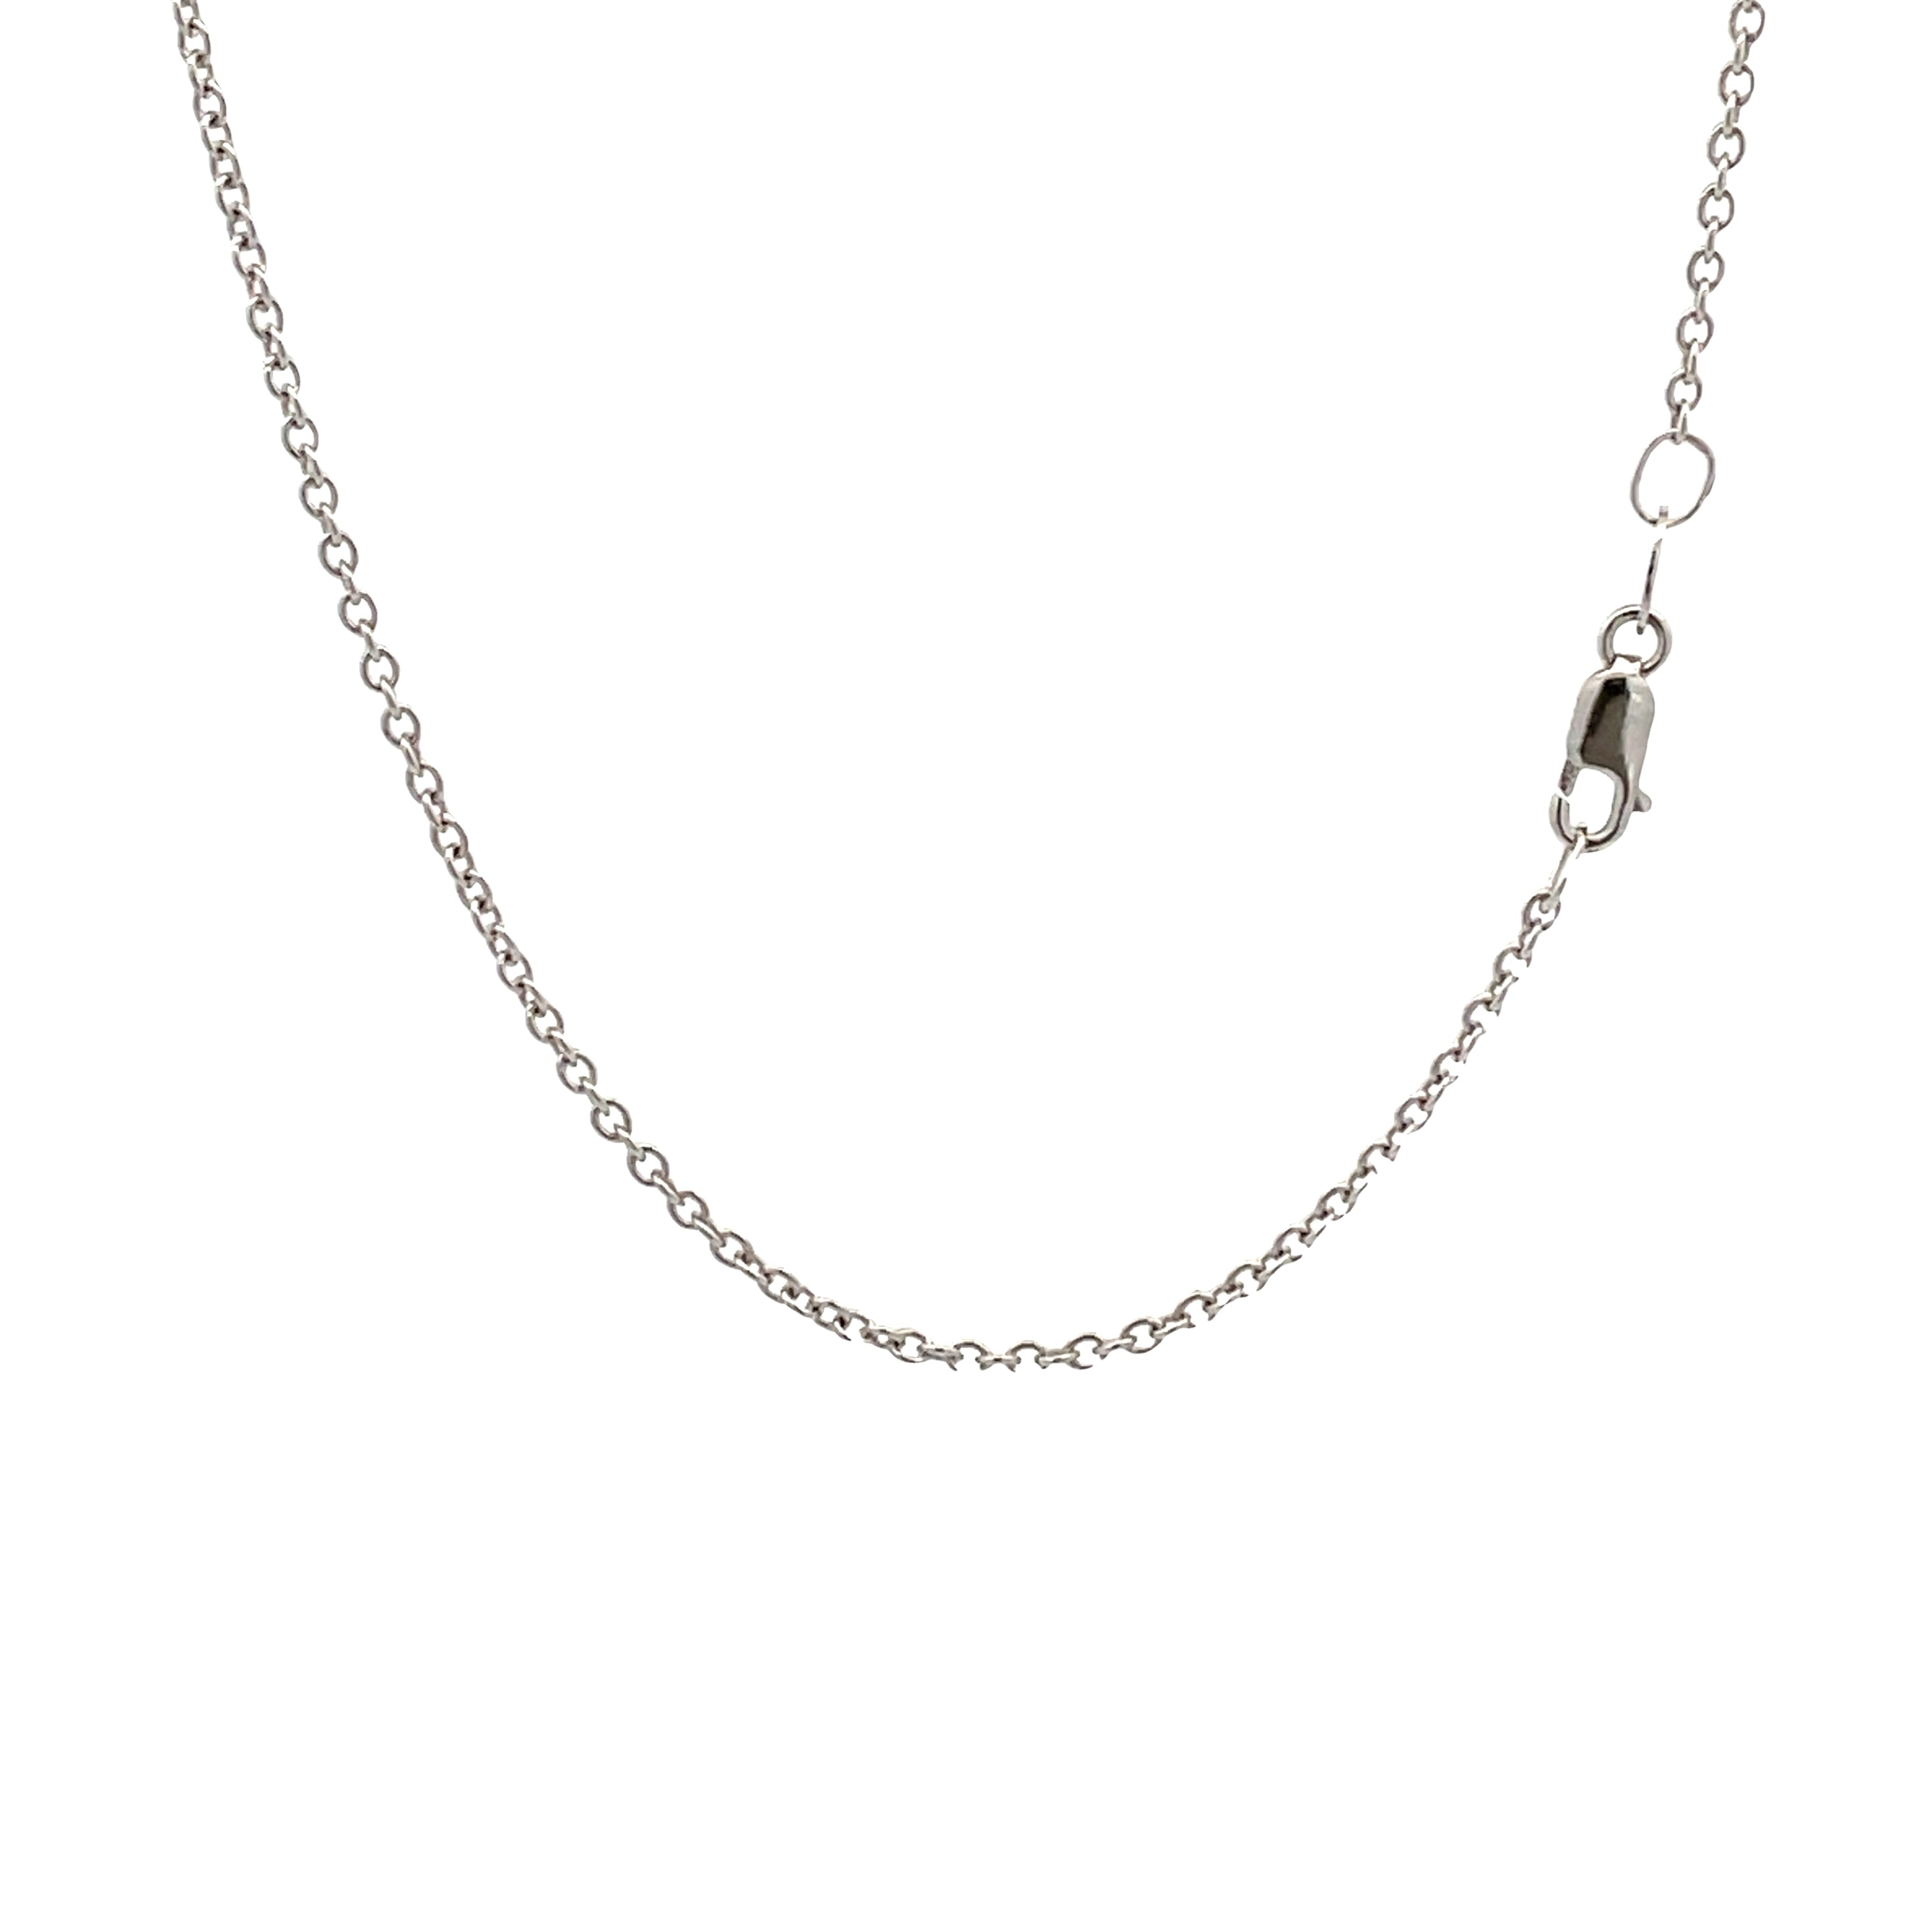 18K White Gold Polished 45cm Cable Chain Necklace